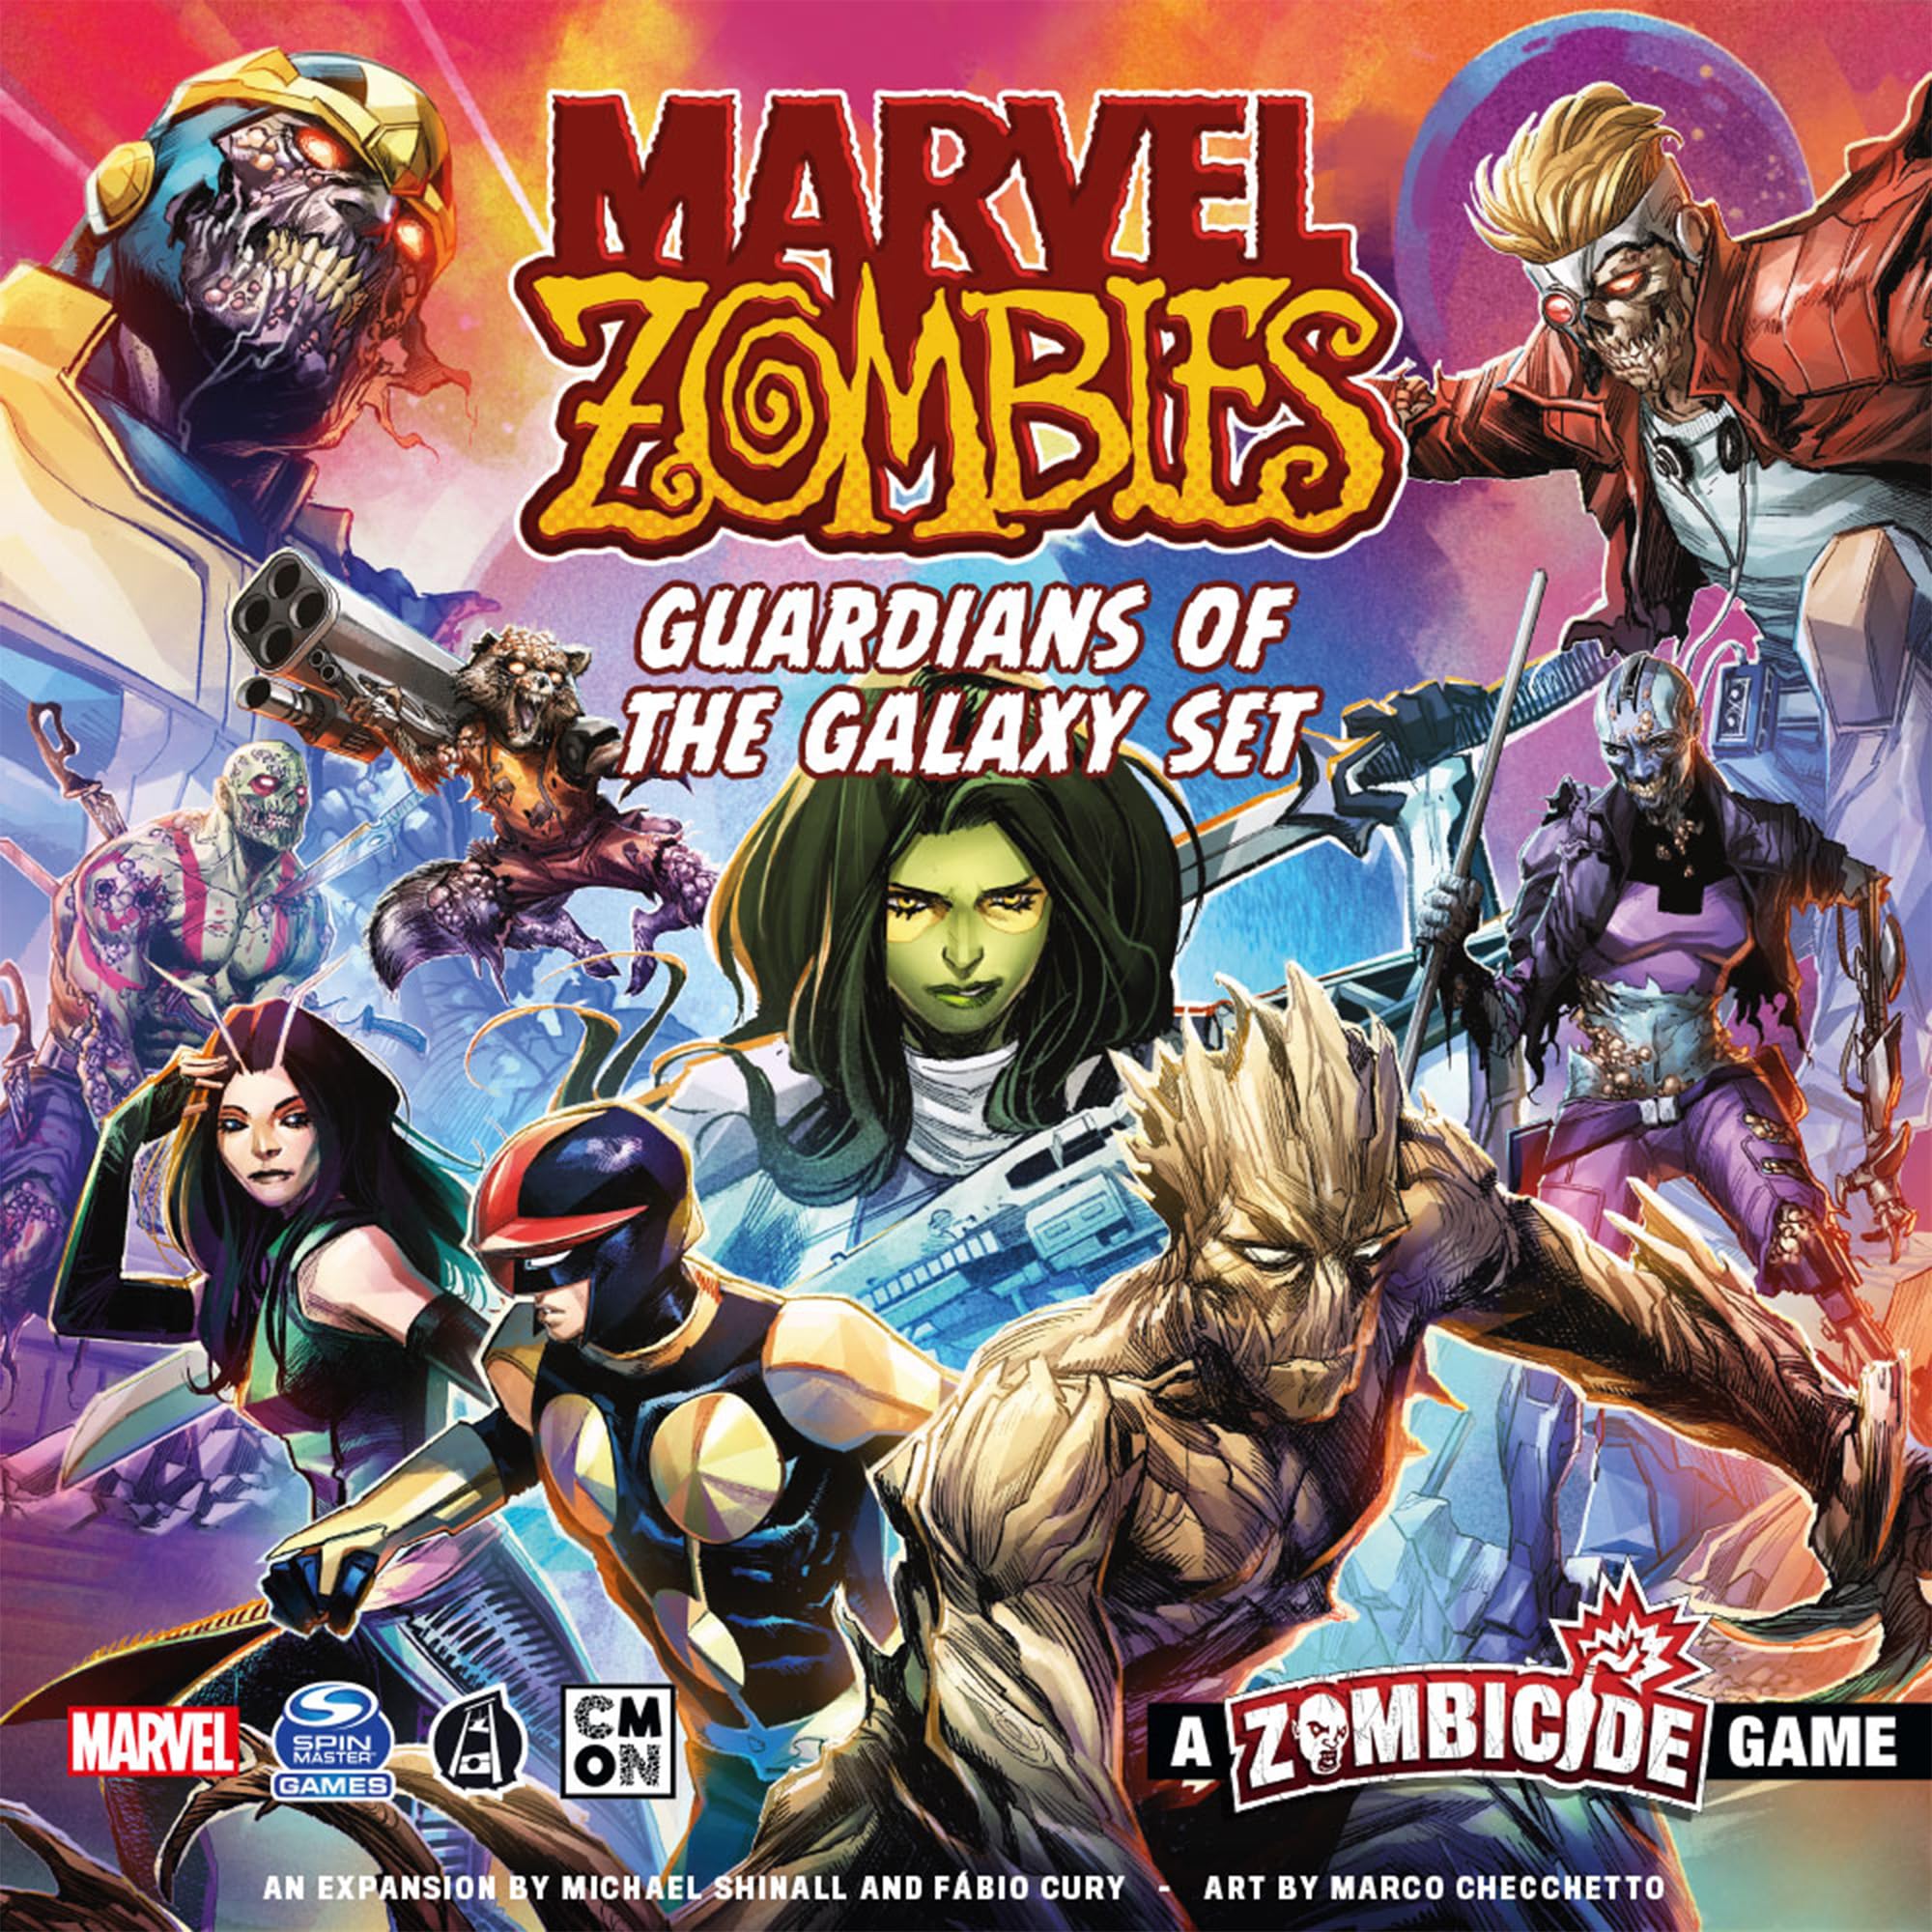 Marvel Zombies Guardians of The Galaxy Expansion - Strategy Board Game, Cooperative Game for Kids and Adults, Zombie Board Game, Ages 14+, 1-6 Players, 90 Minute Playtime, Made by CMON